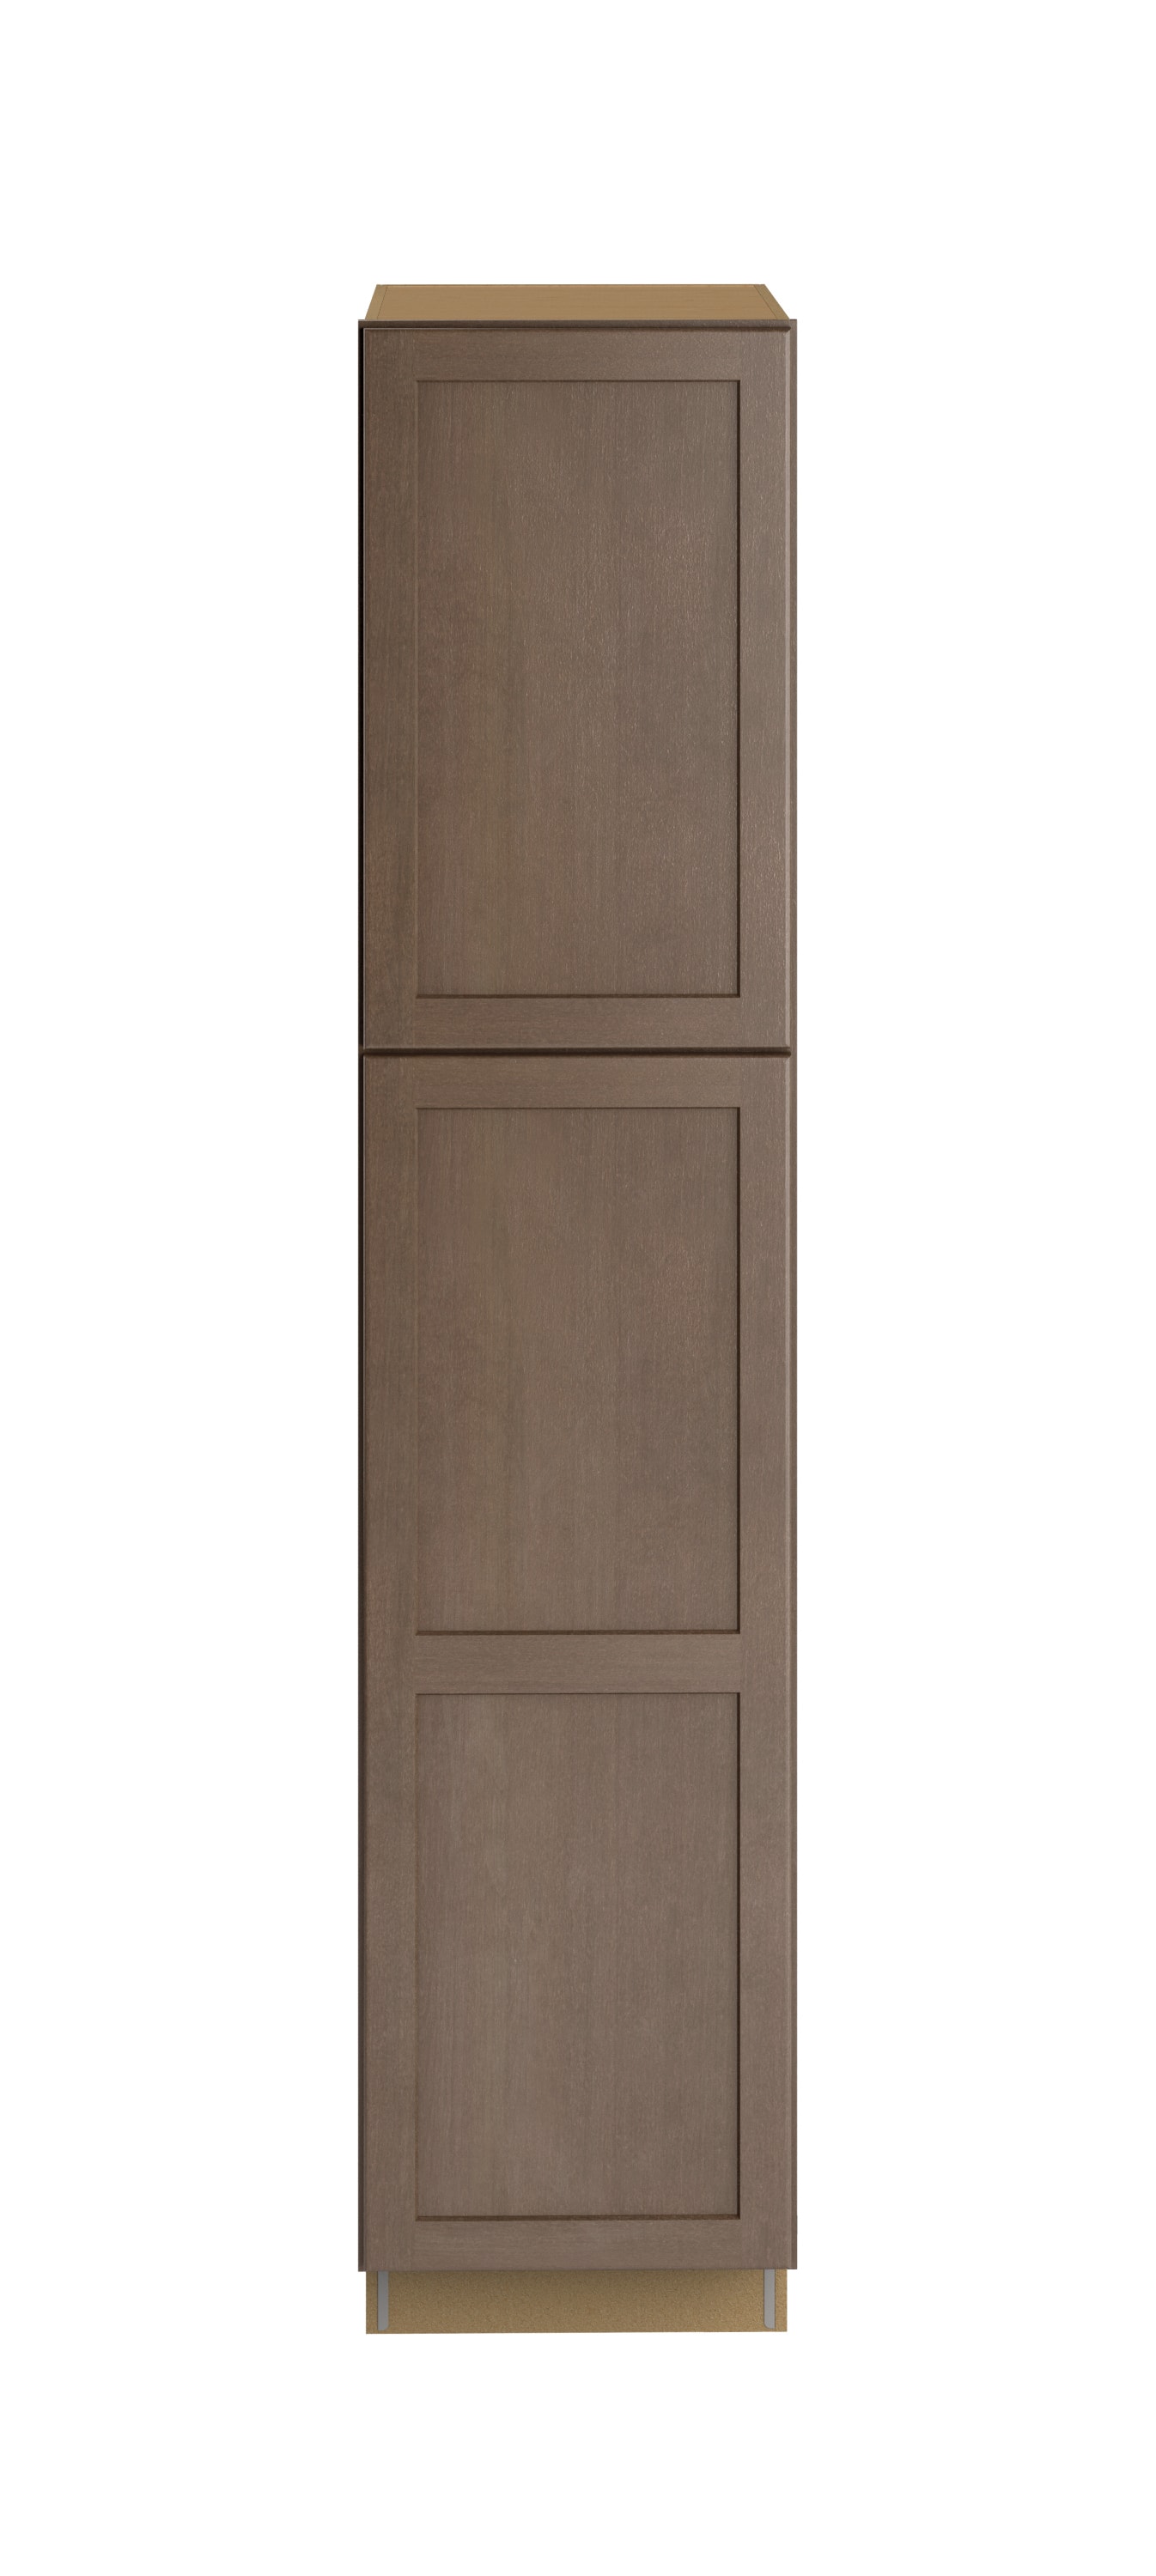 Diamond at Lowes - Organization - Tall Pantry Pullout